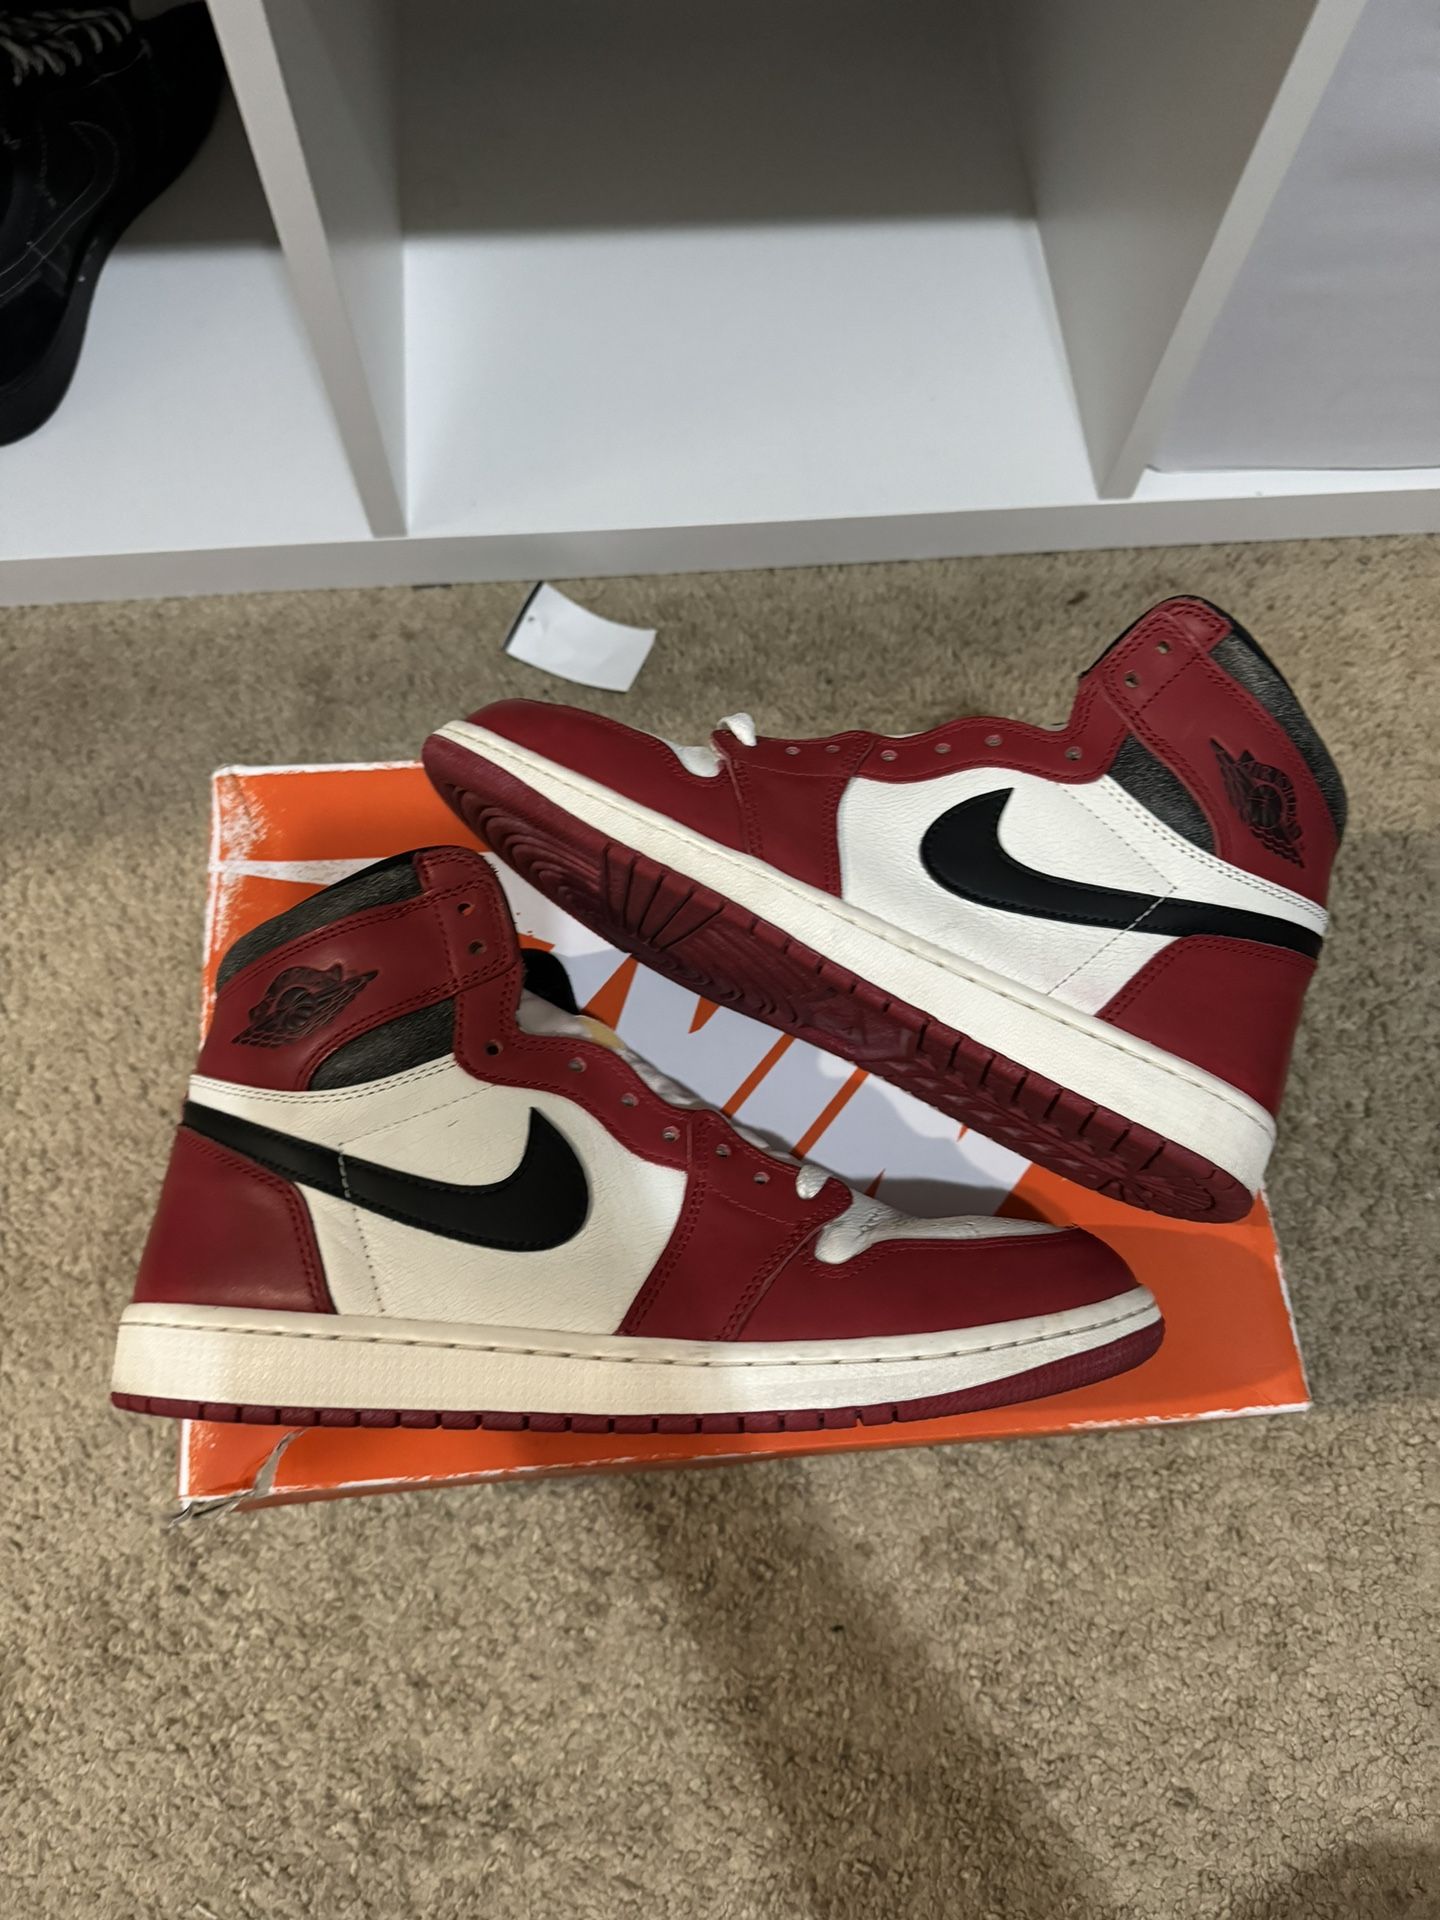 Jordan 1 Lost And Found Size 11